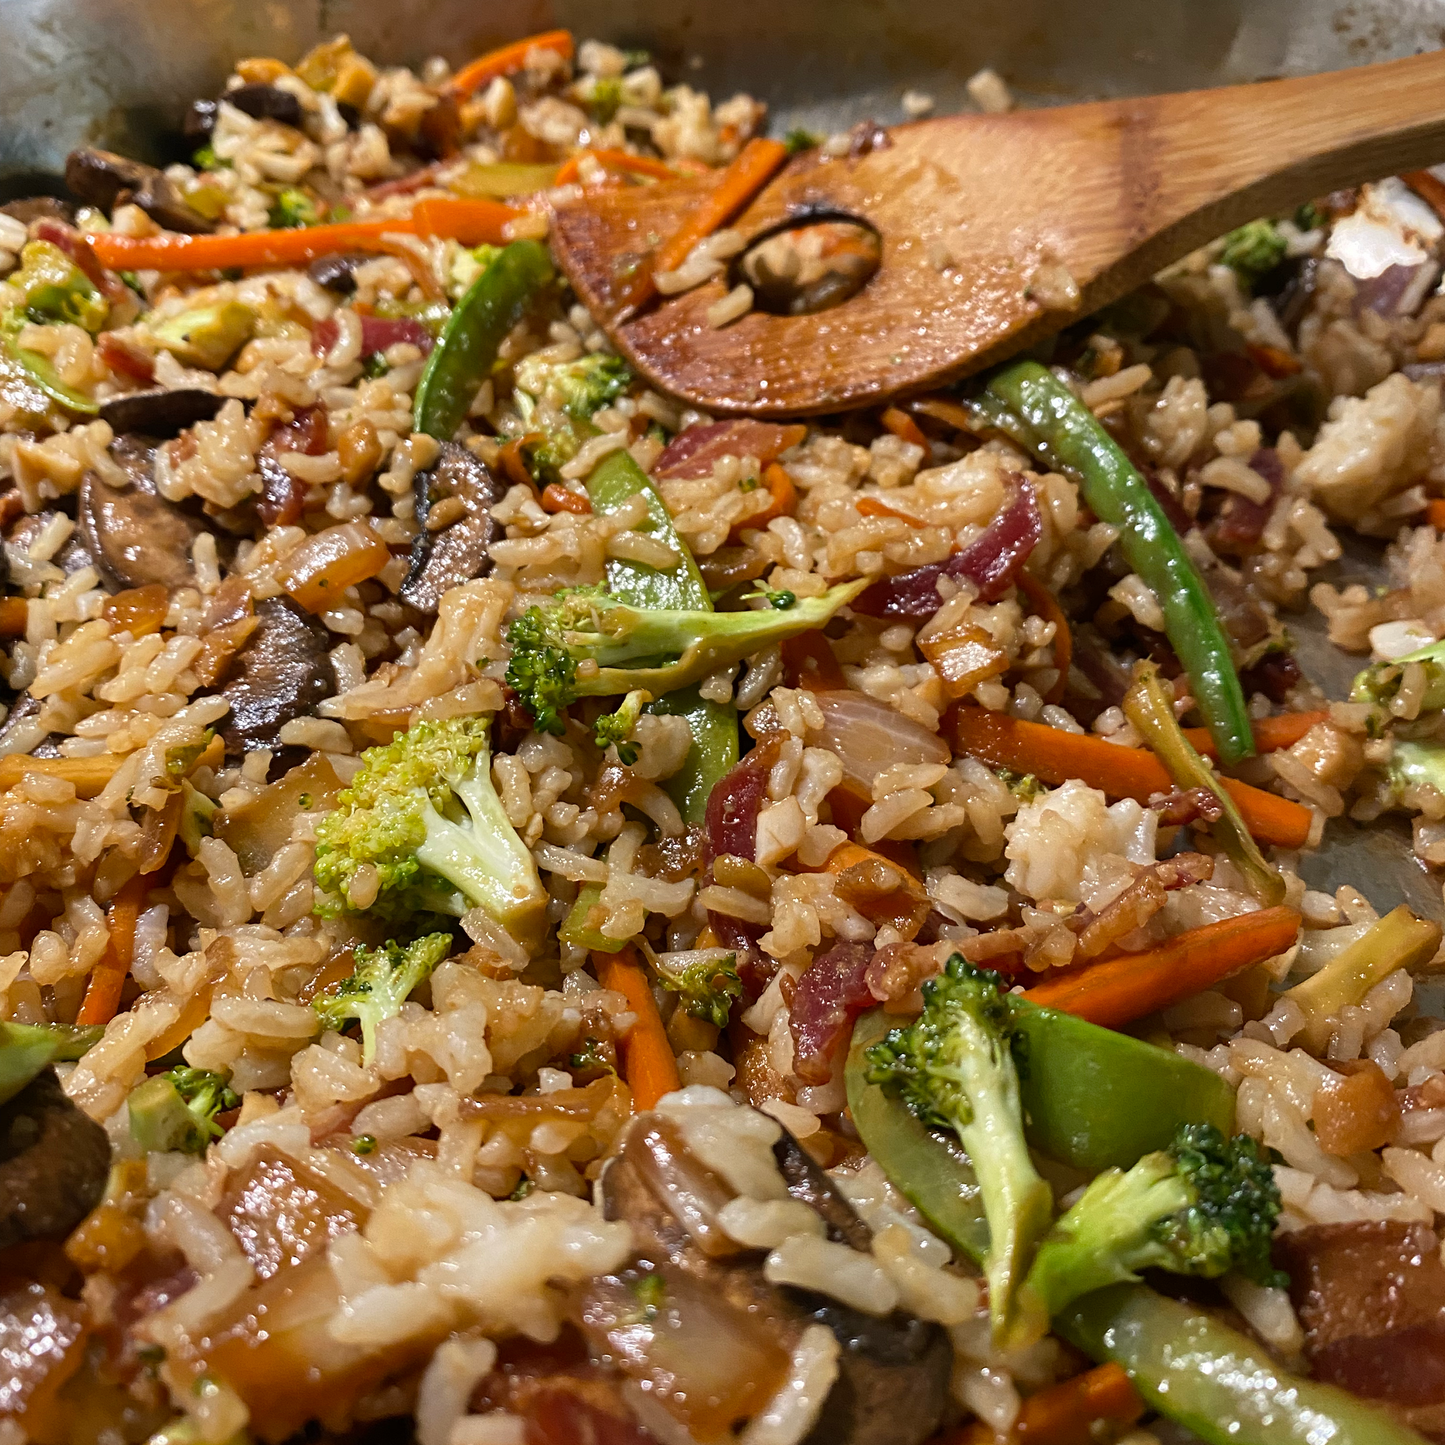 Vegetable stir fry in a pan with a wooden spoon.  The stir fry includes broccoli, onion, carrots, mushrooms, bacon, rice, and a scrambled egg.